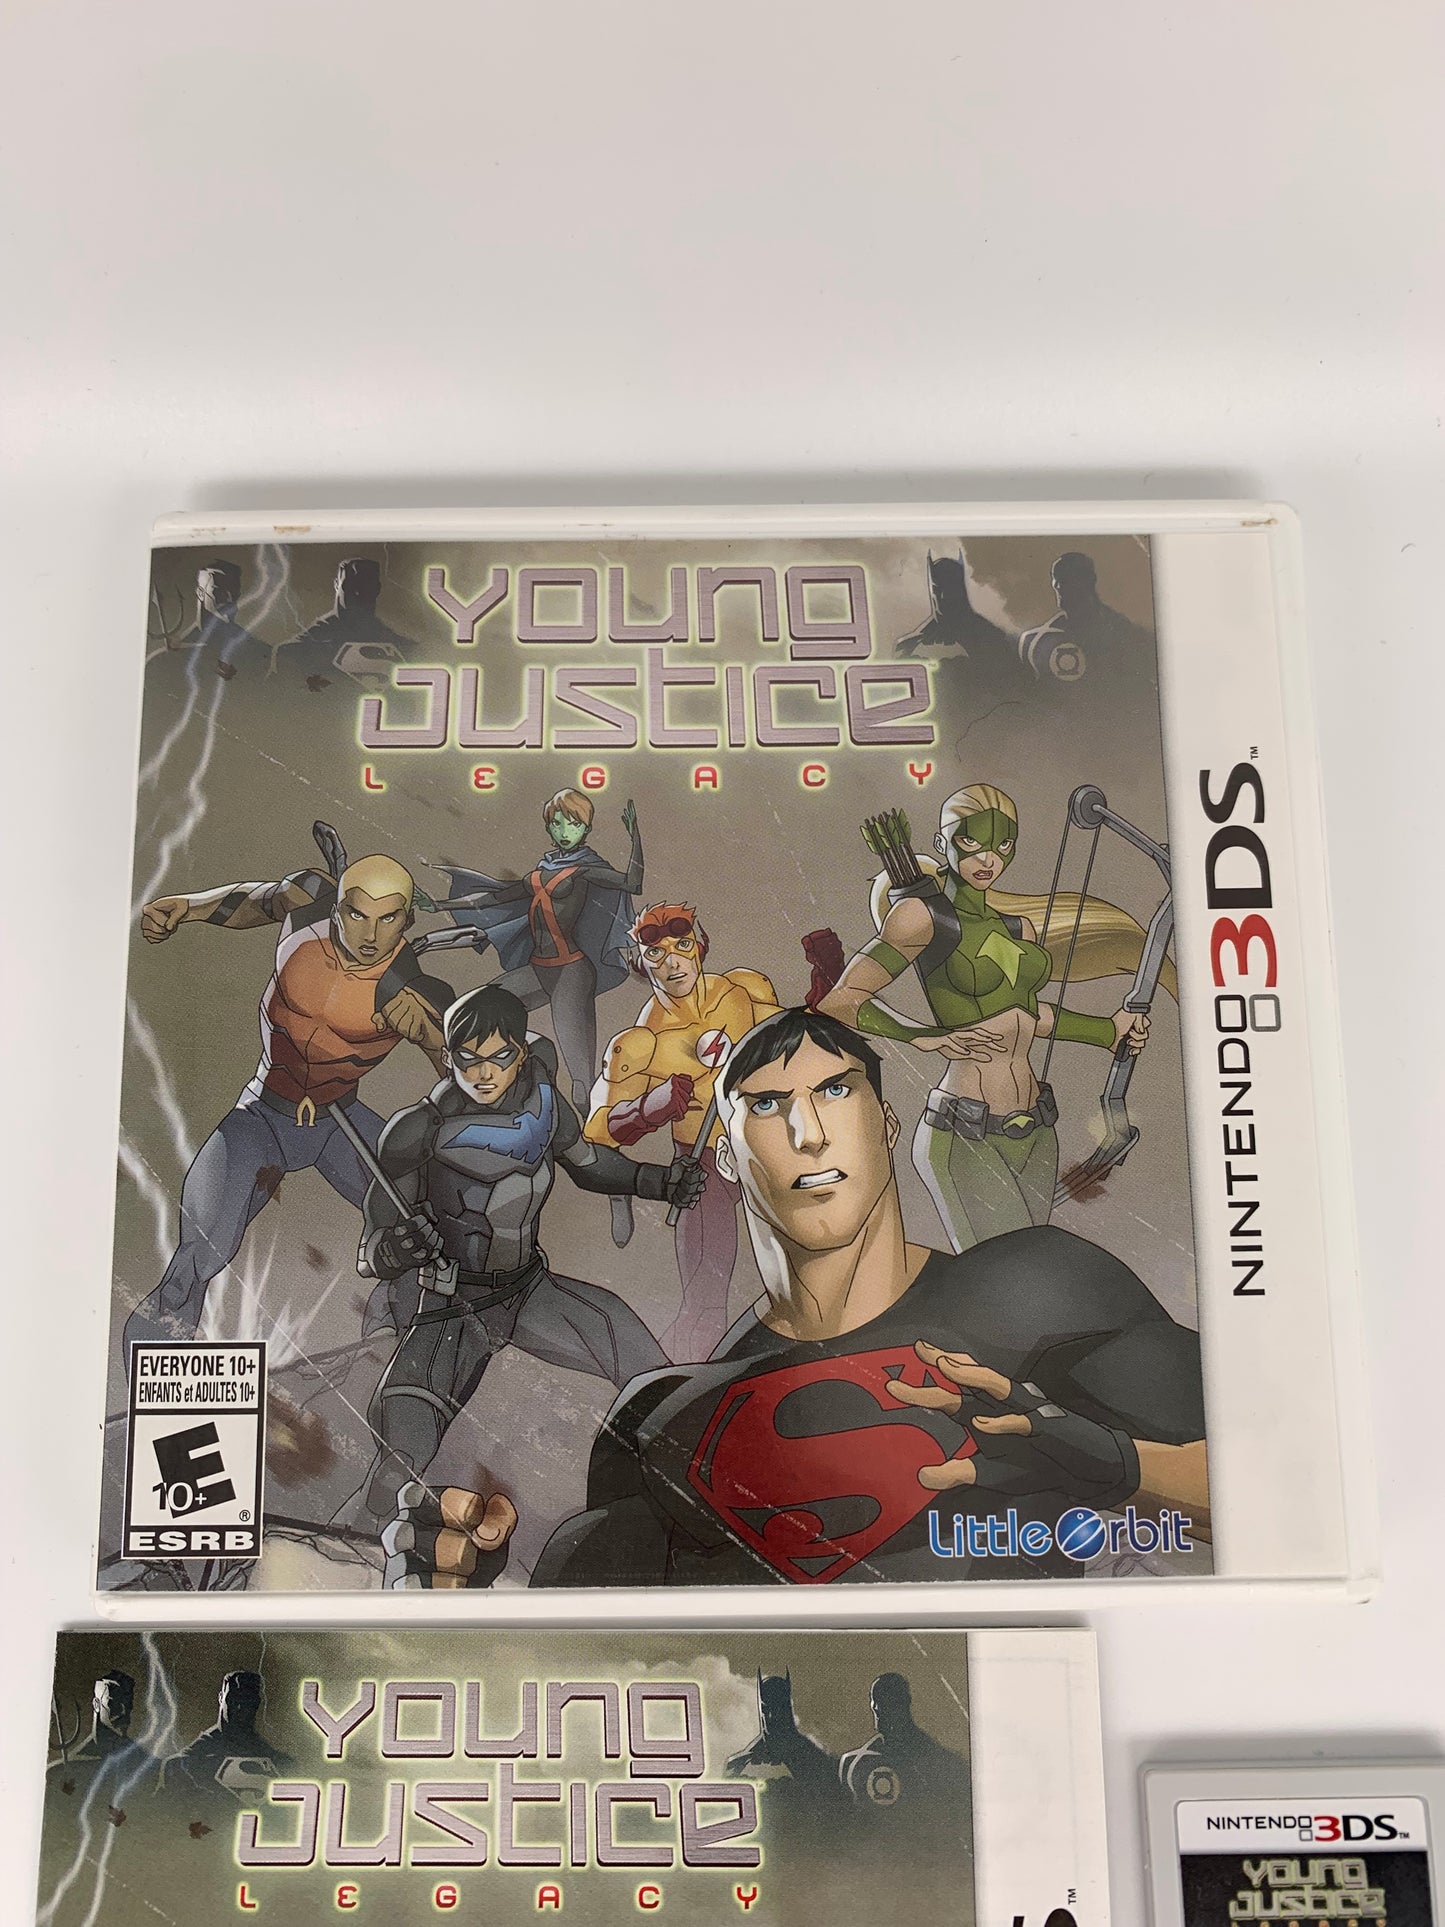 NiNTENDO 3DS | YOUNG JUSTiCE LEGACY